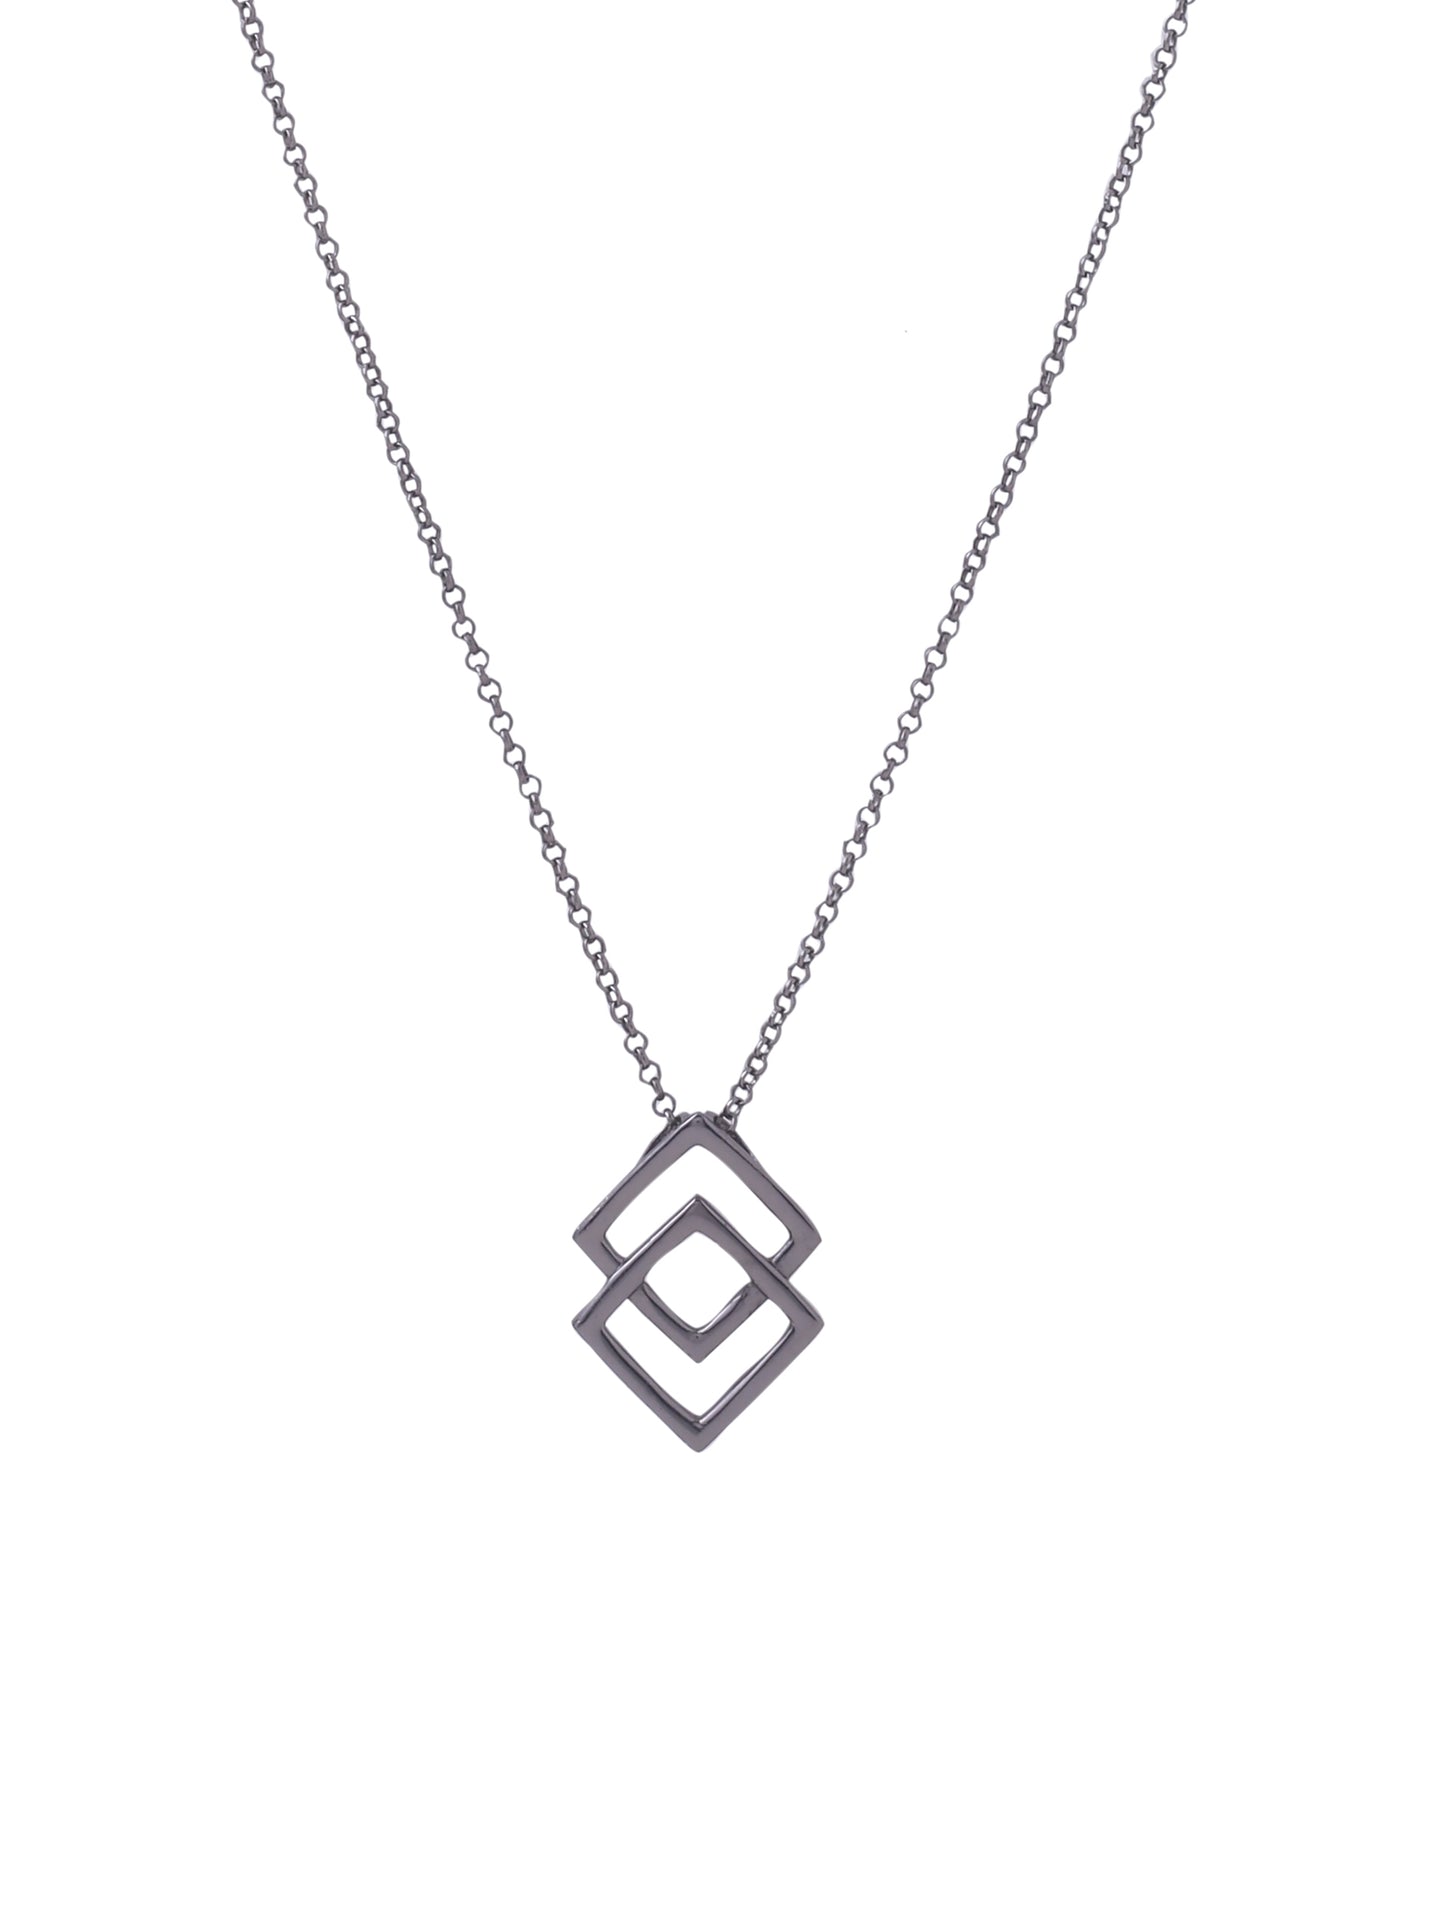 The Symphonic Fusion pendant with chain